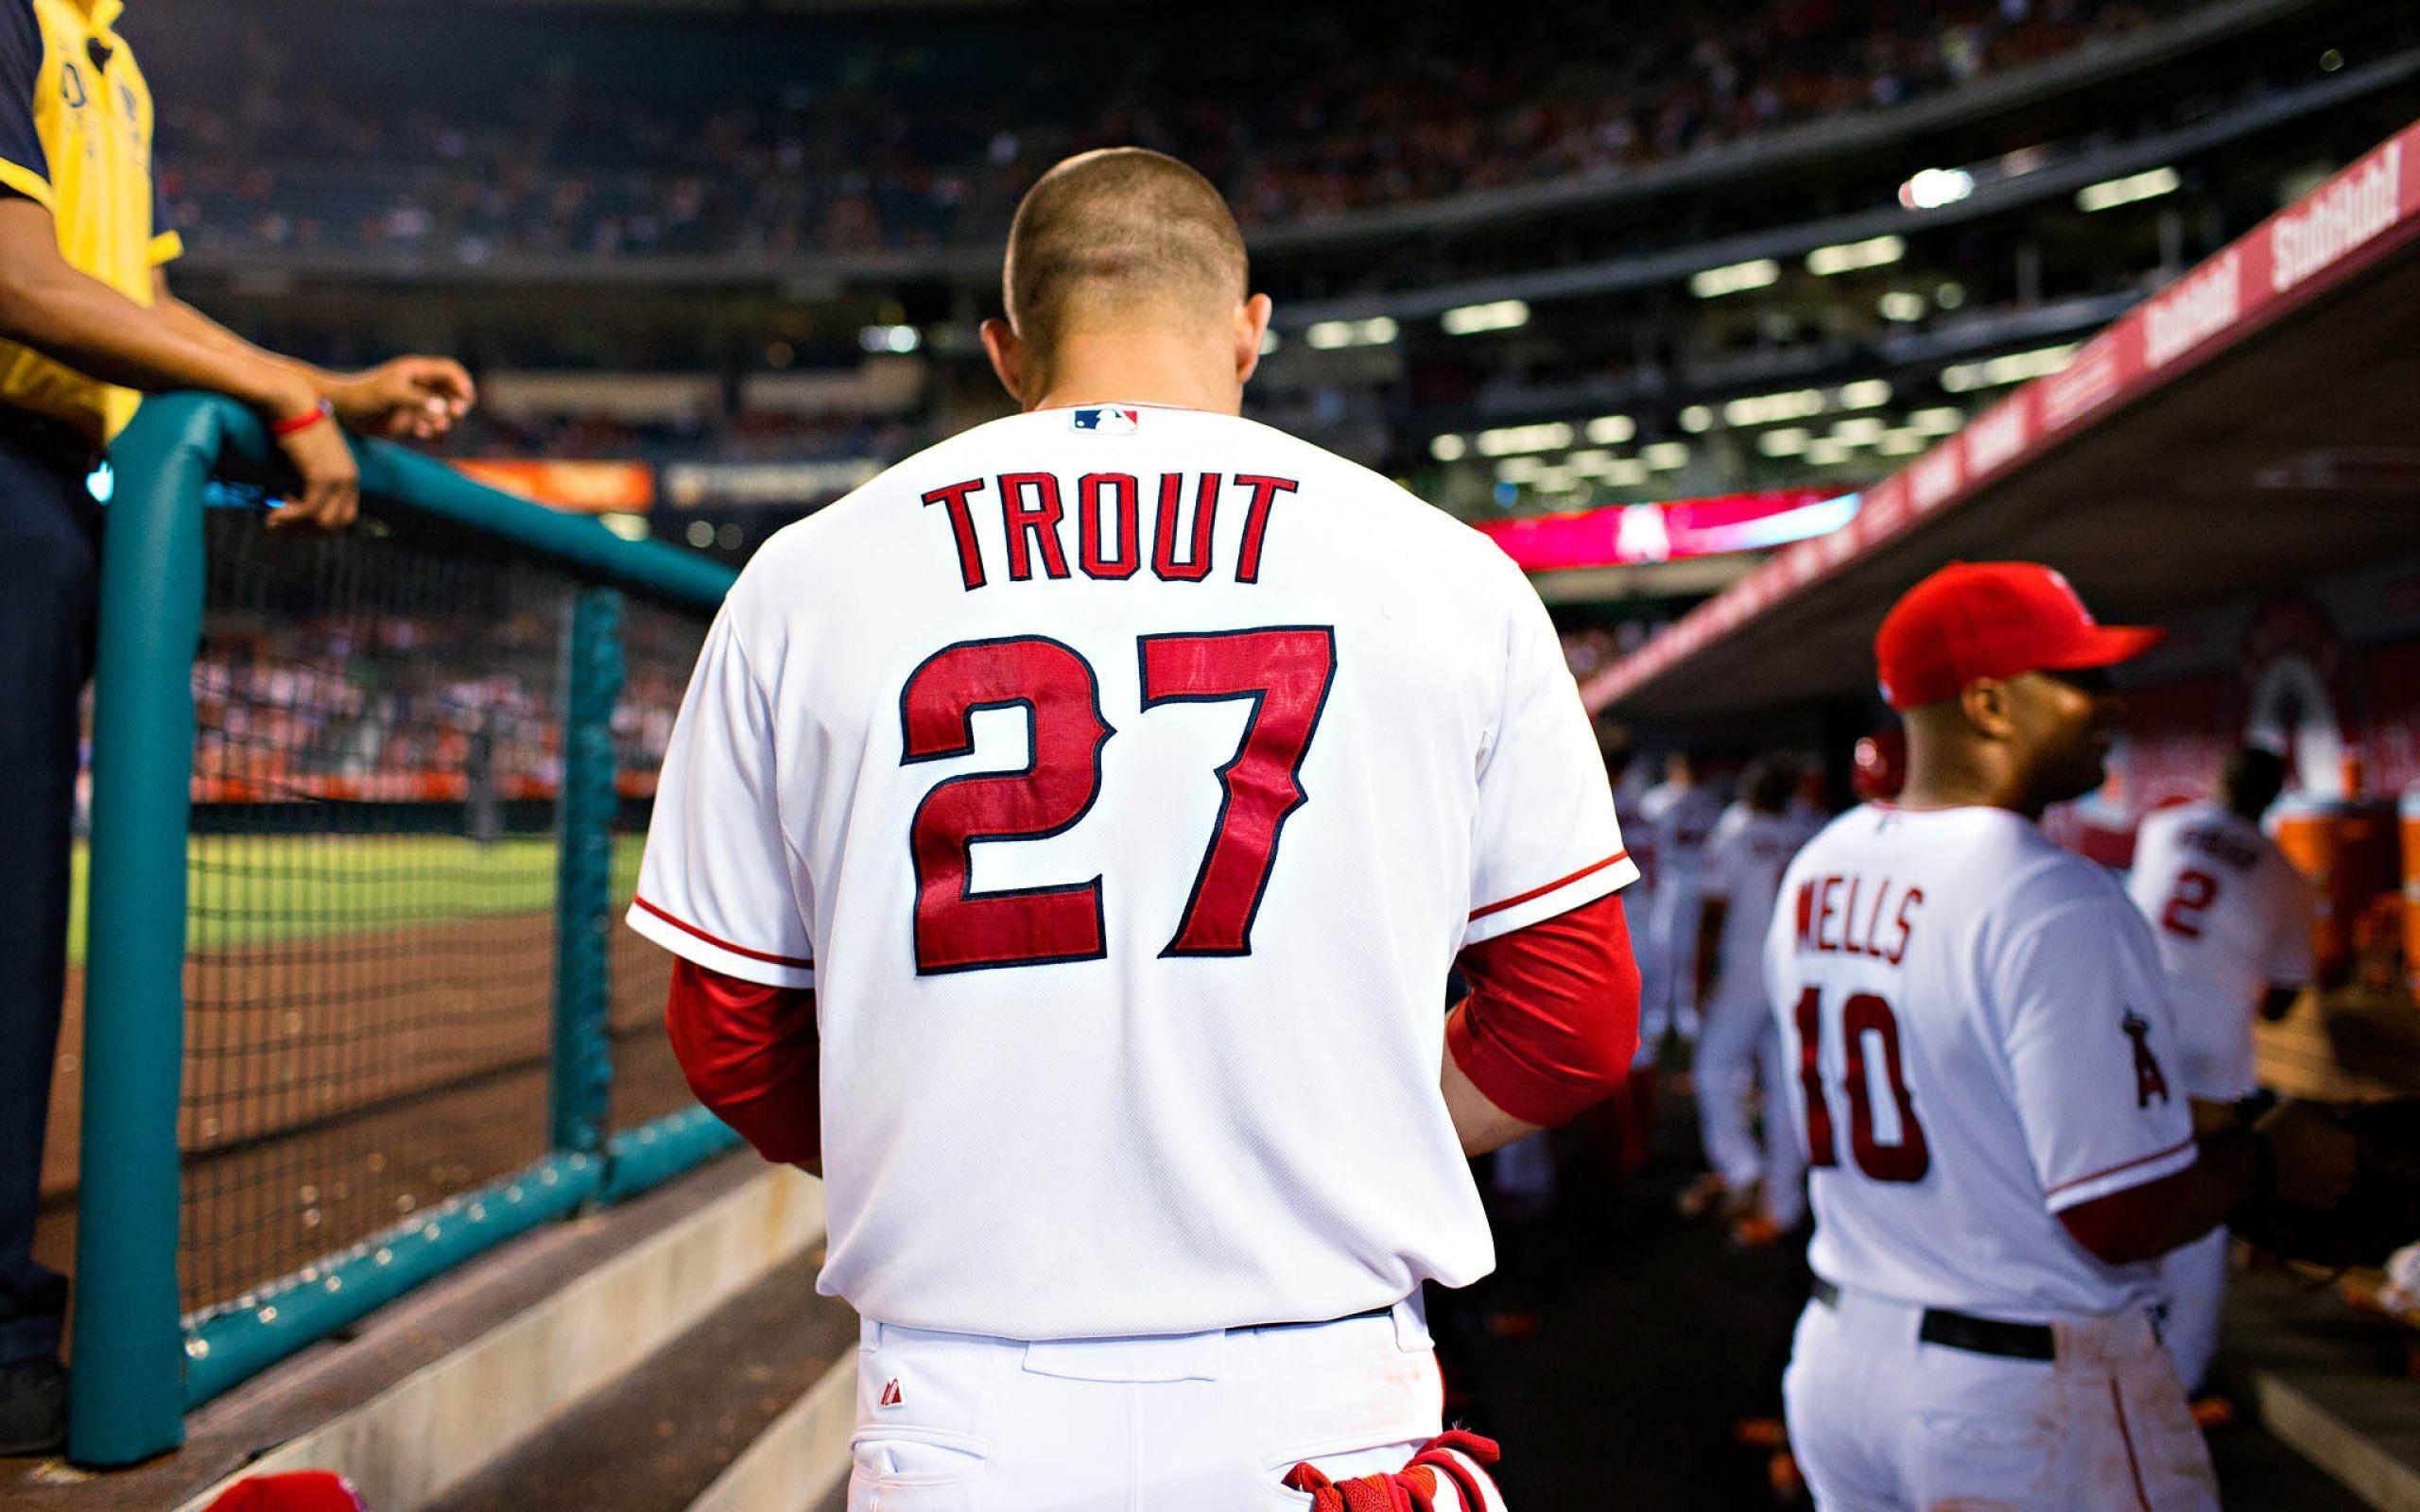 Download Wallpaper 2560x1600 Mike trout, Baseball, Los angeles